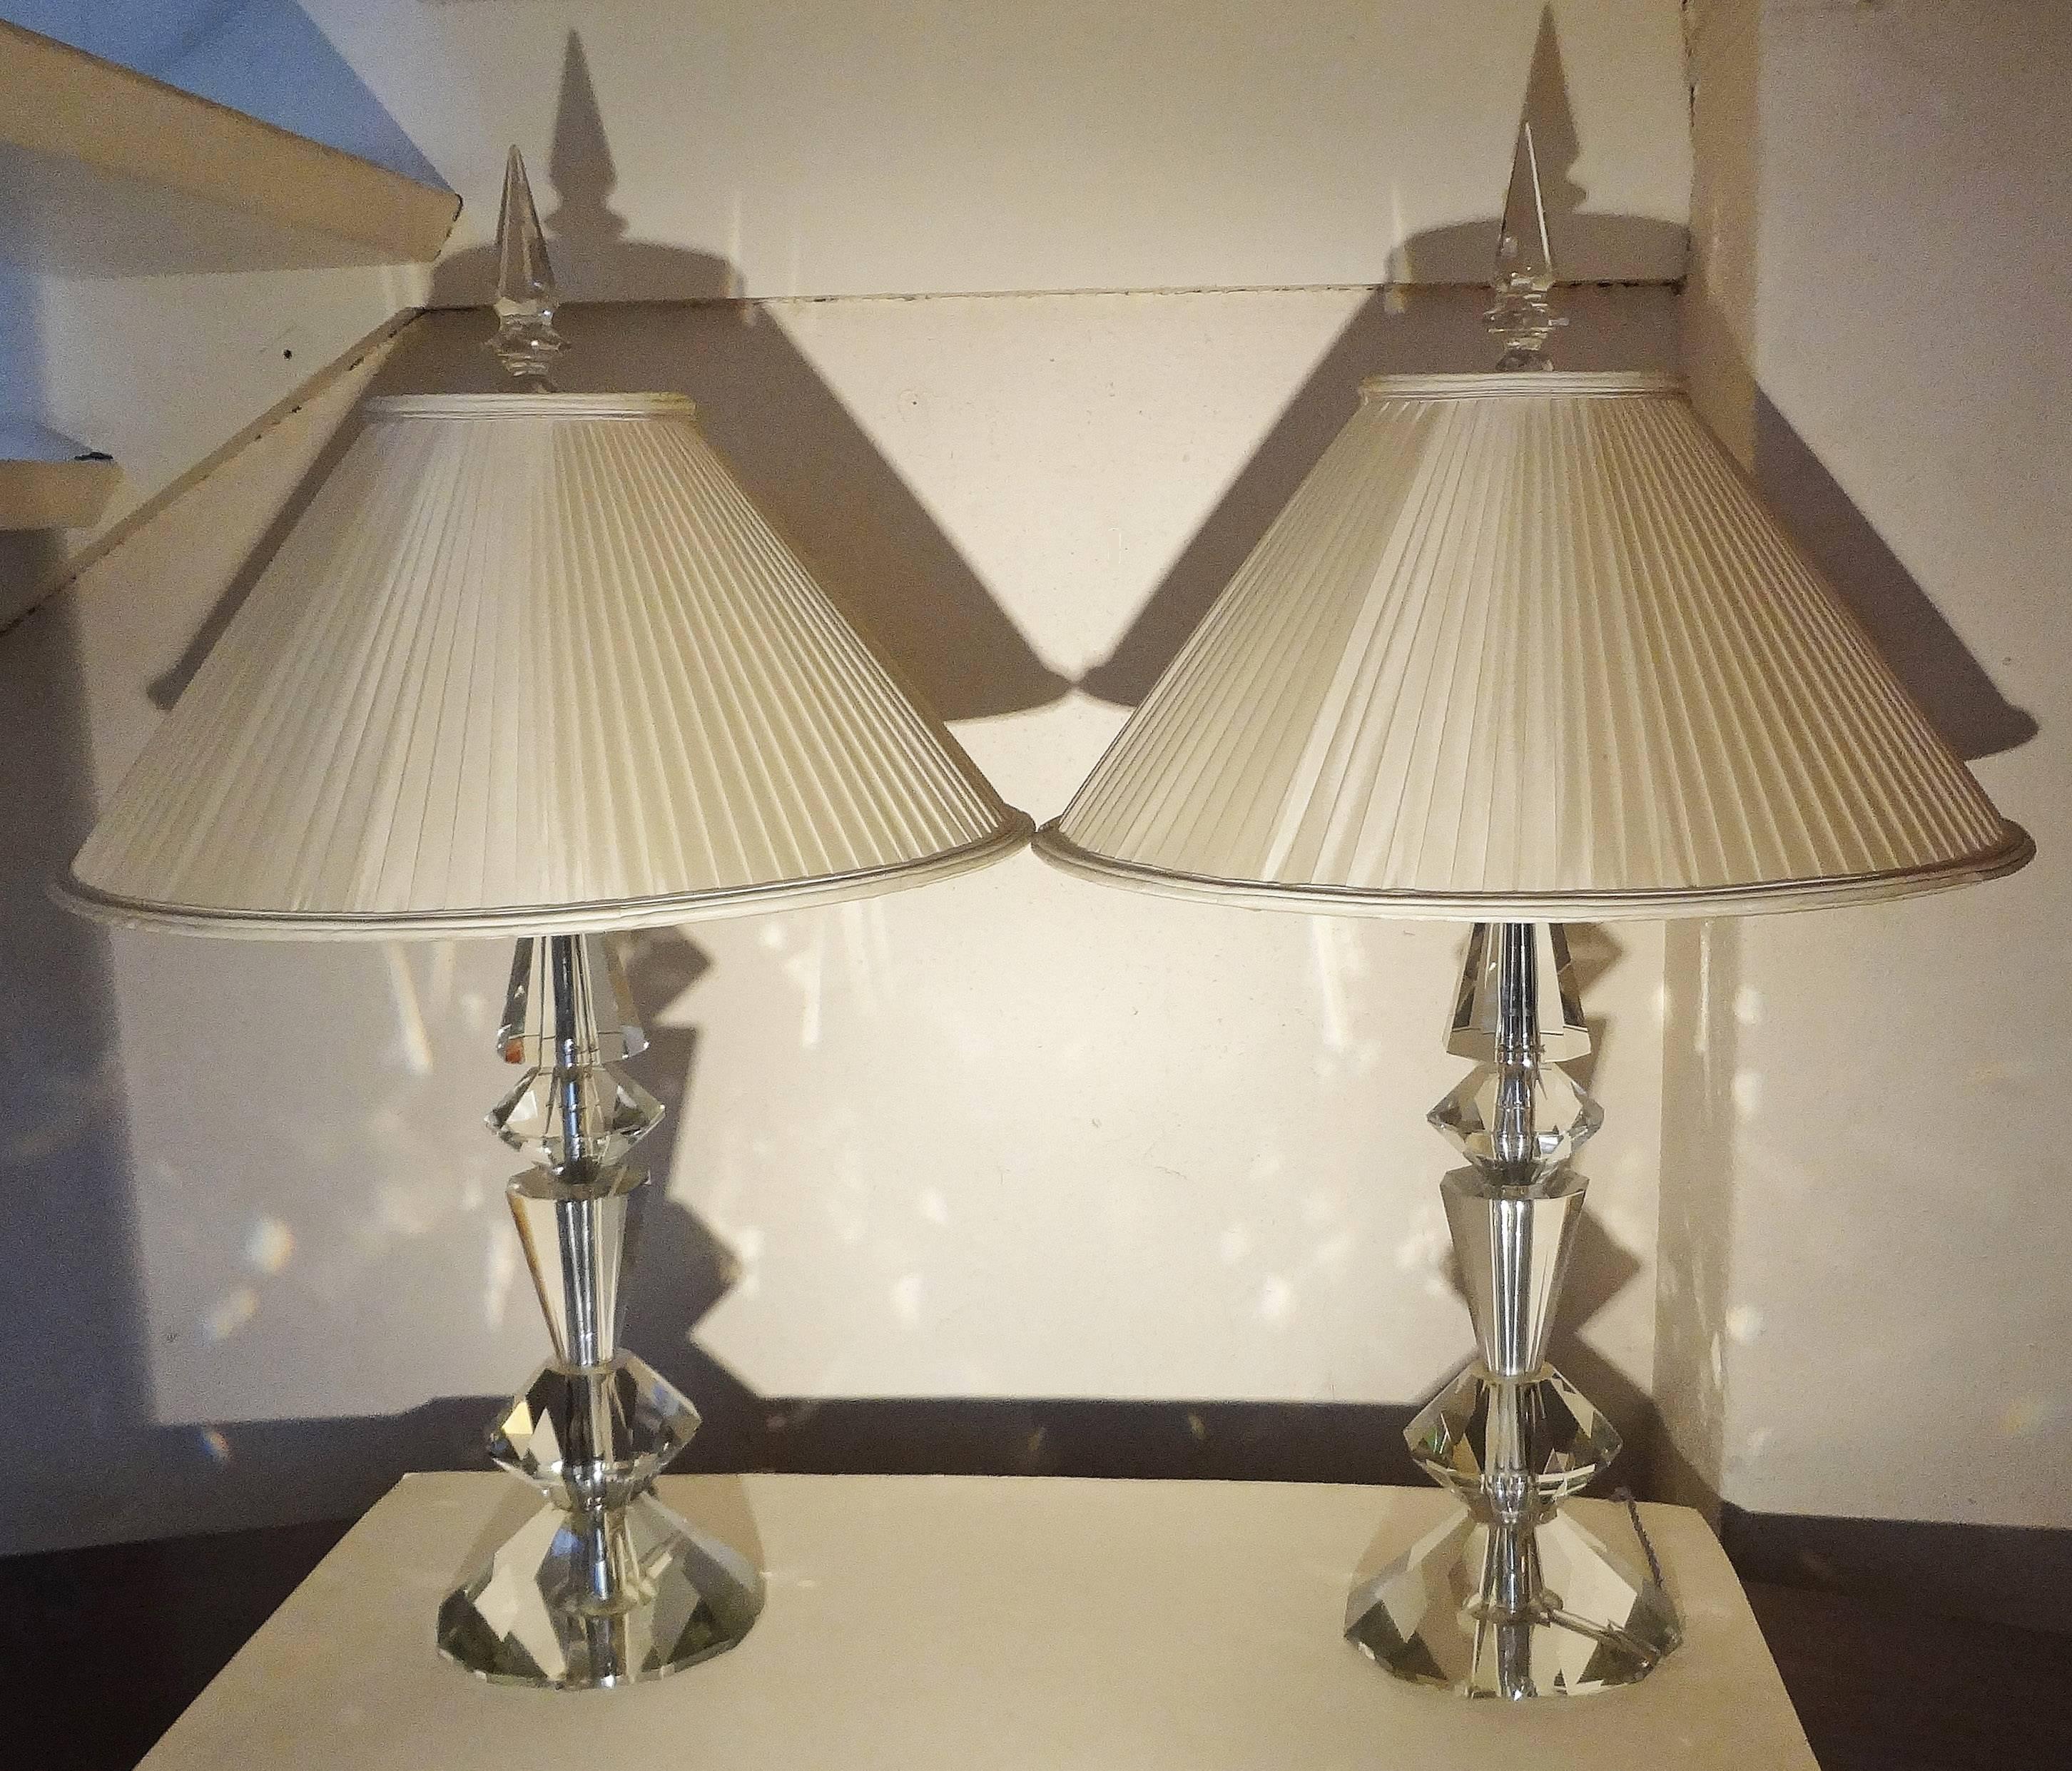 Spectacular pair of cut-glass table lamps, France, 1940s.
Diamond shape. Vintage silk shade. Metal structure.
Measure: Base diameter 18 cm.